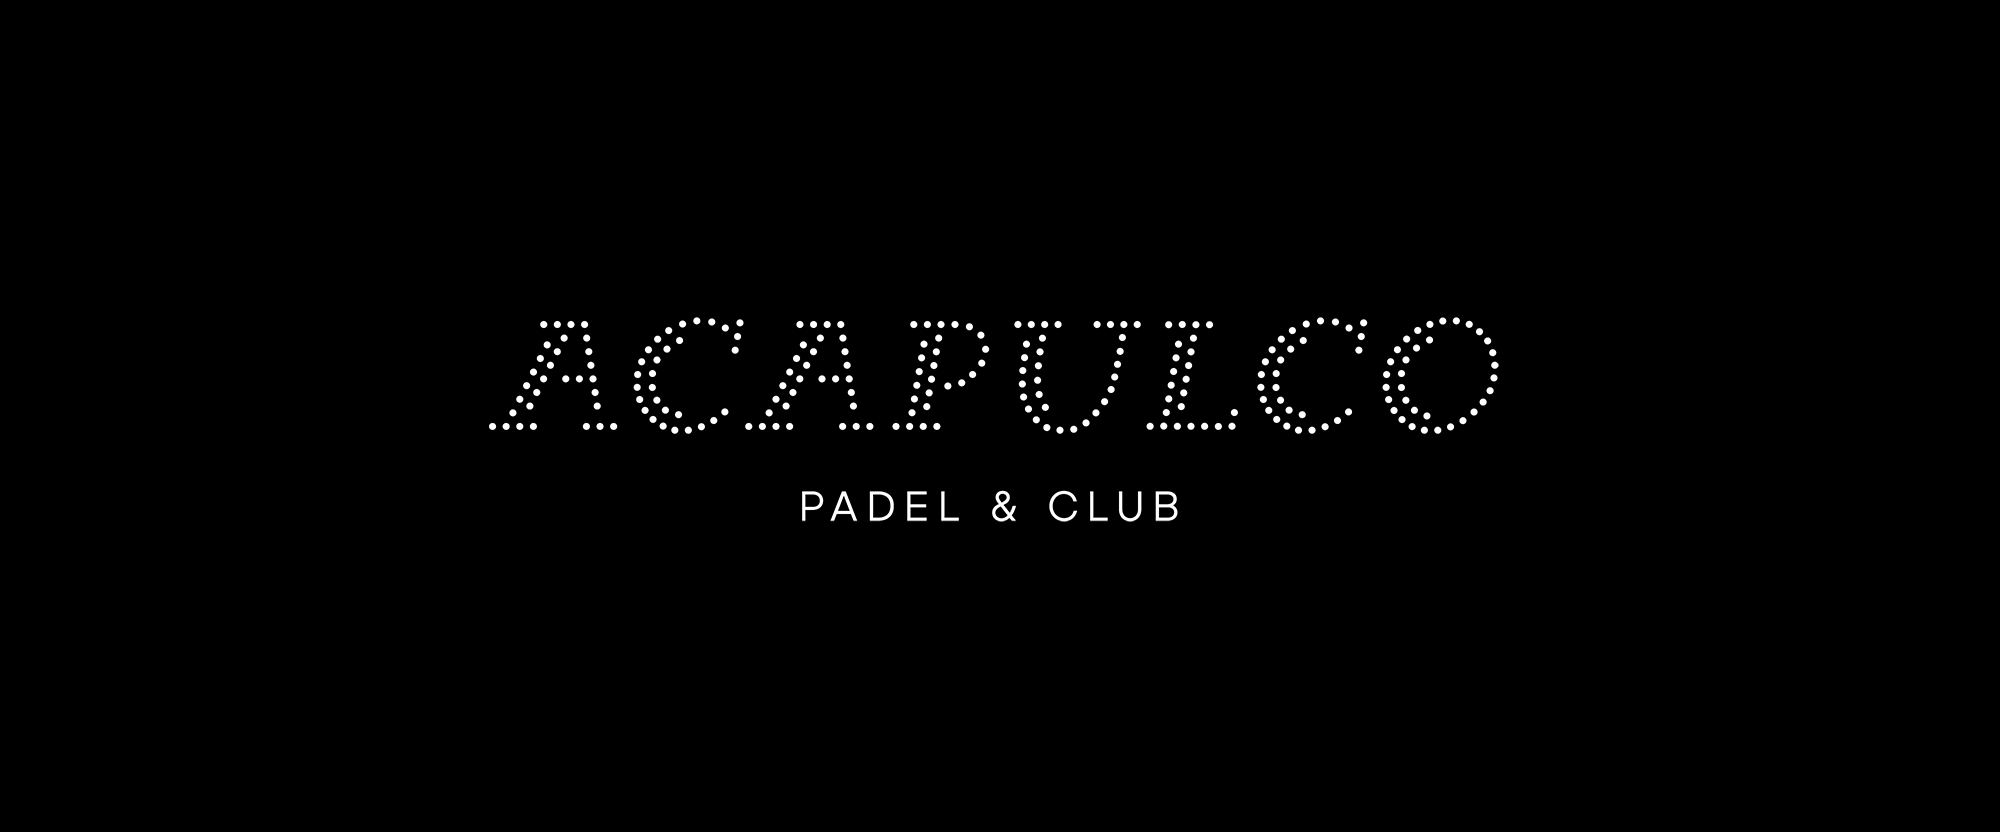 New Logo and Identity for Acapulco Padel & Club by Bedow